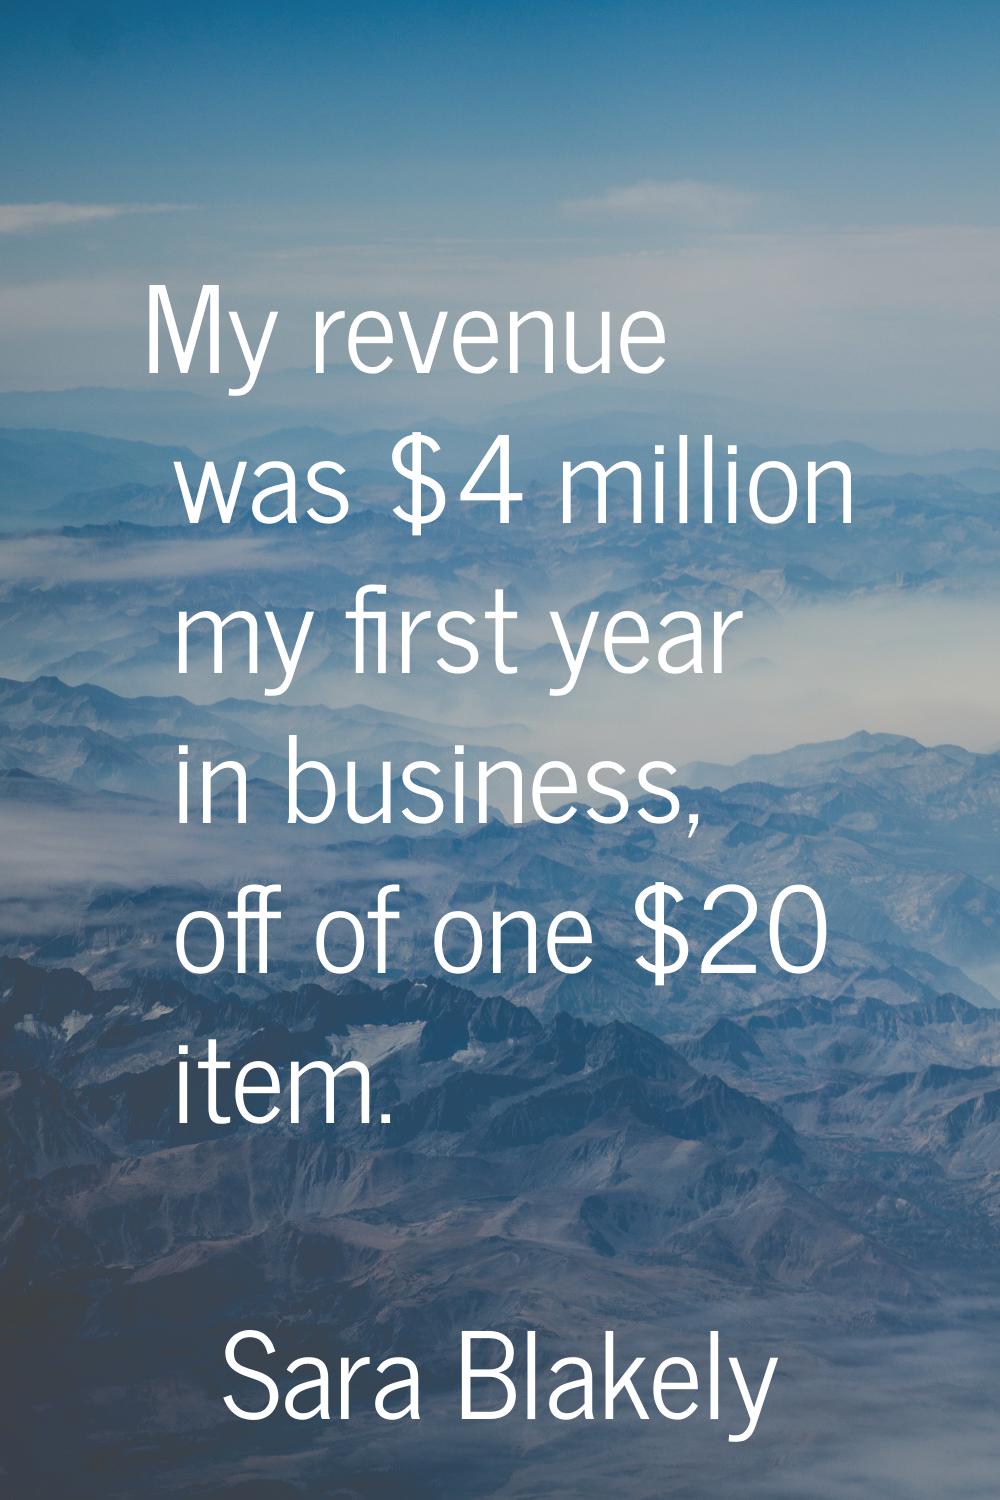 My revenue was $4 million my first year in business, off of one $20 item.